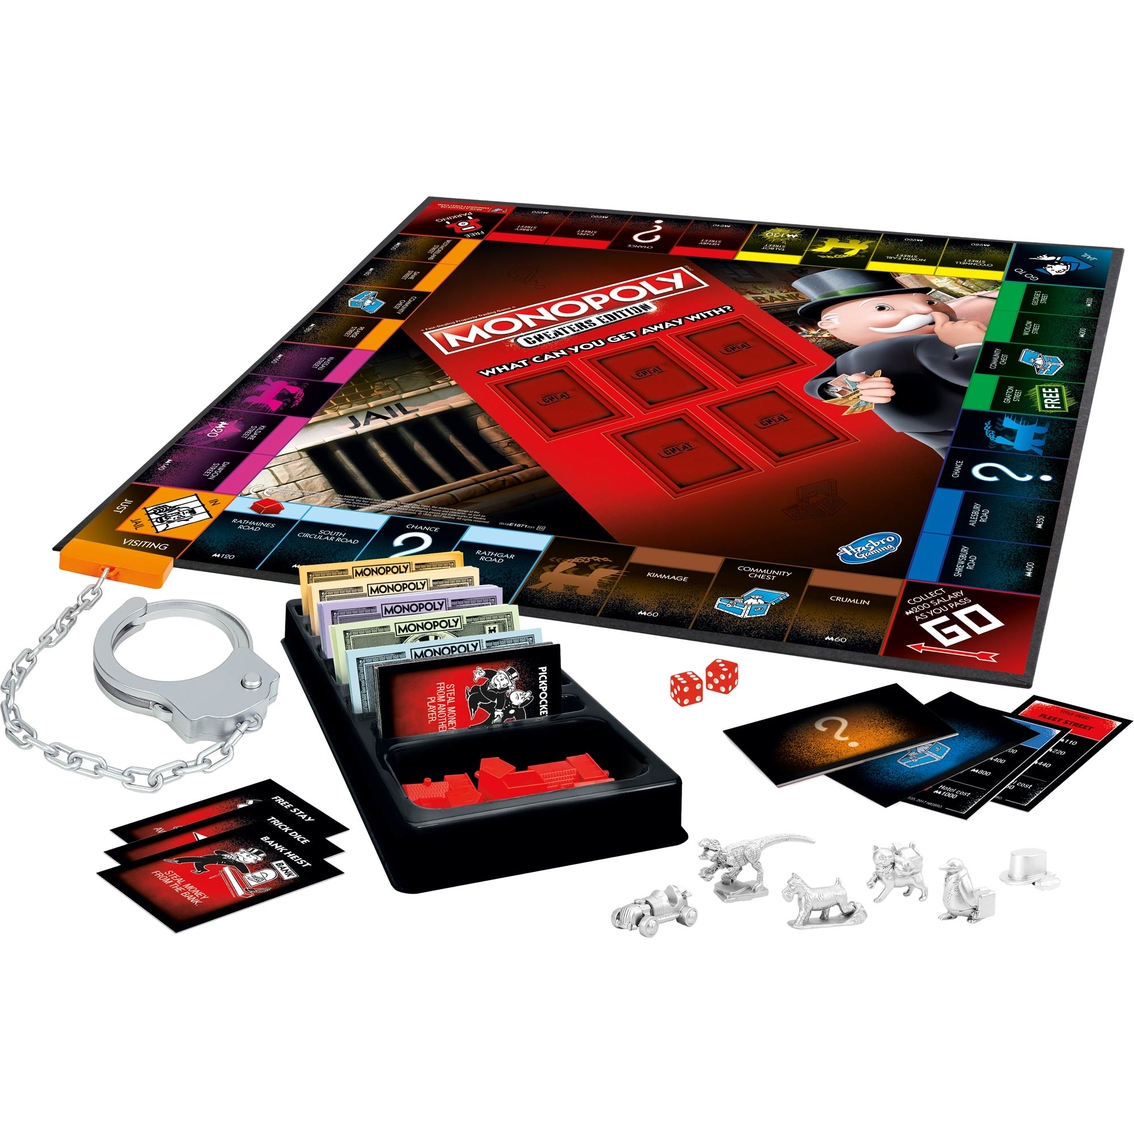 Hasbro Monopoly Cheaters Edition Game - Image 3 of 4